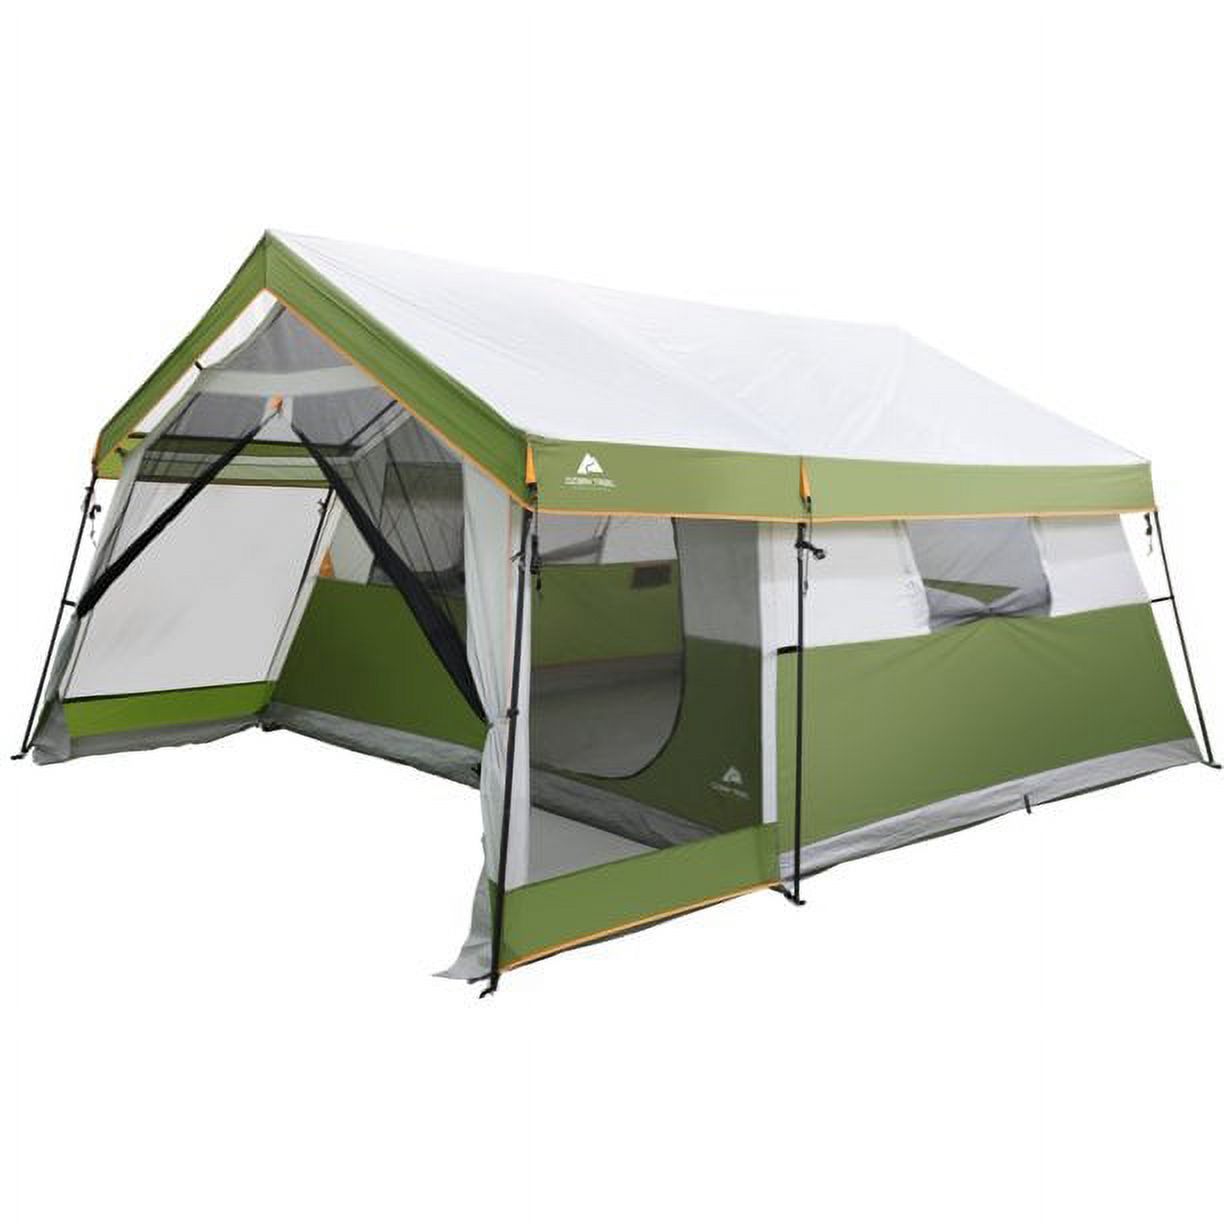 Ozark Trail 8-Person Family Cabin Tent 1 Room with Screen Porch, Green ...